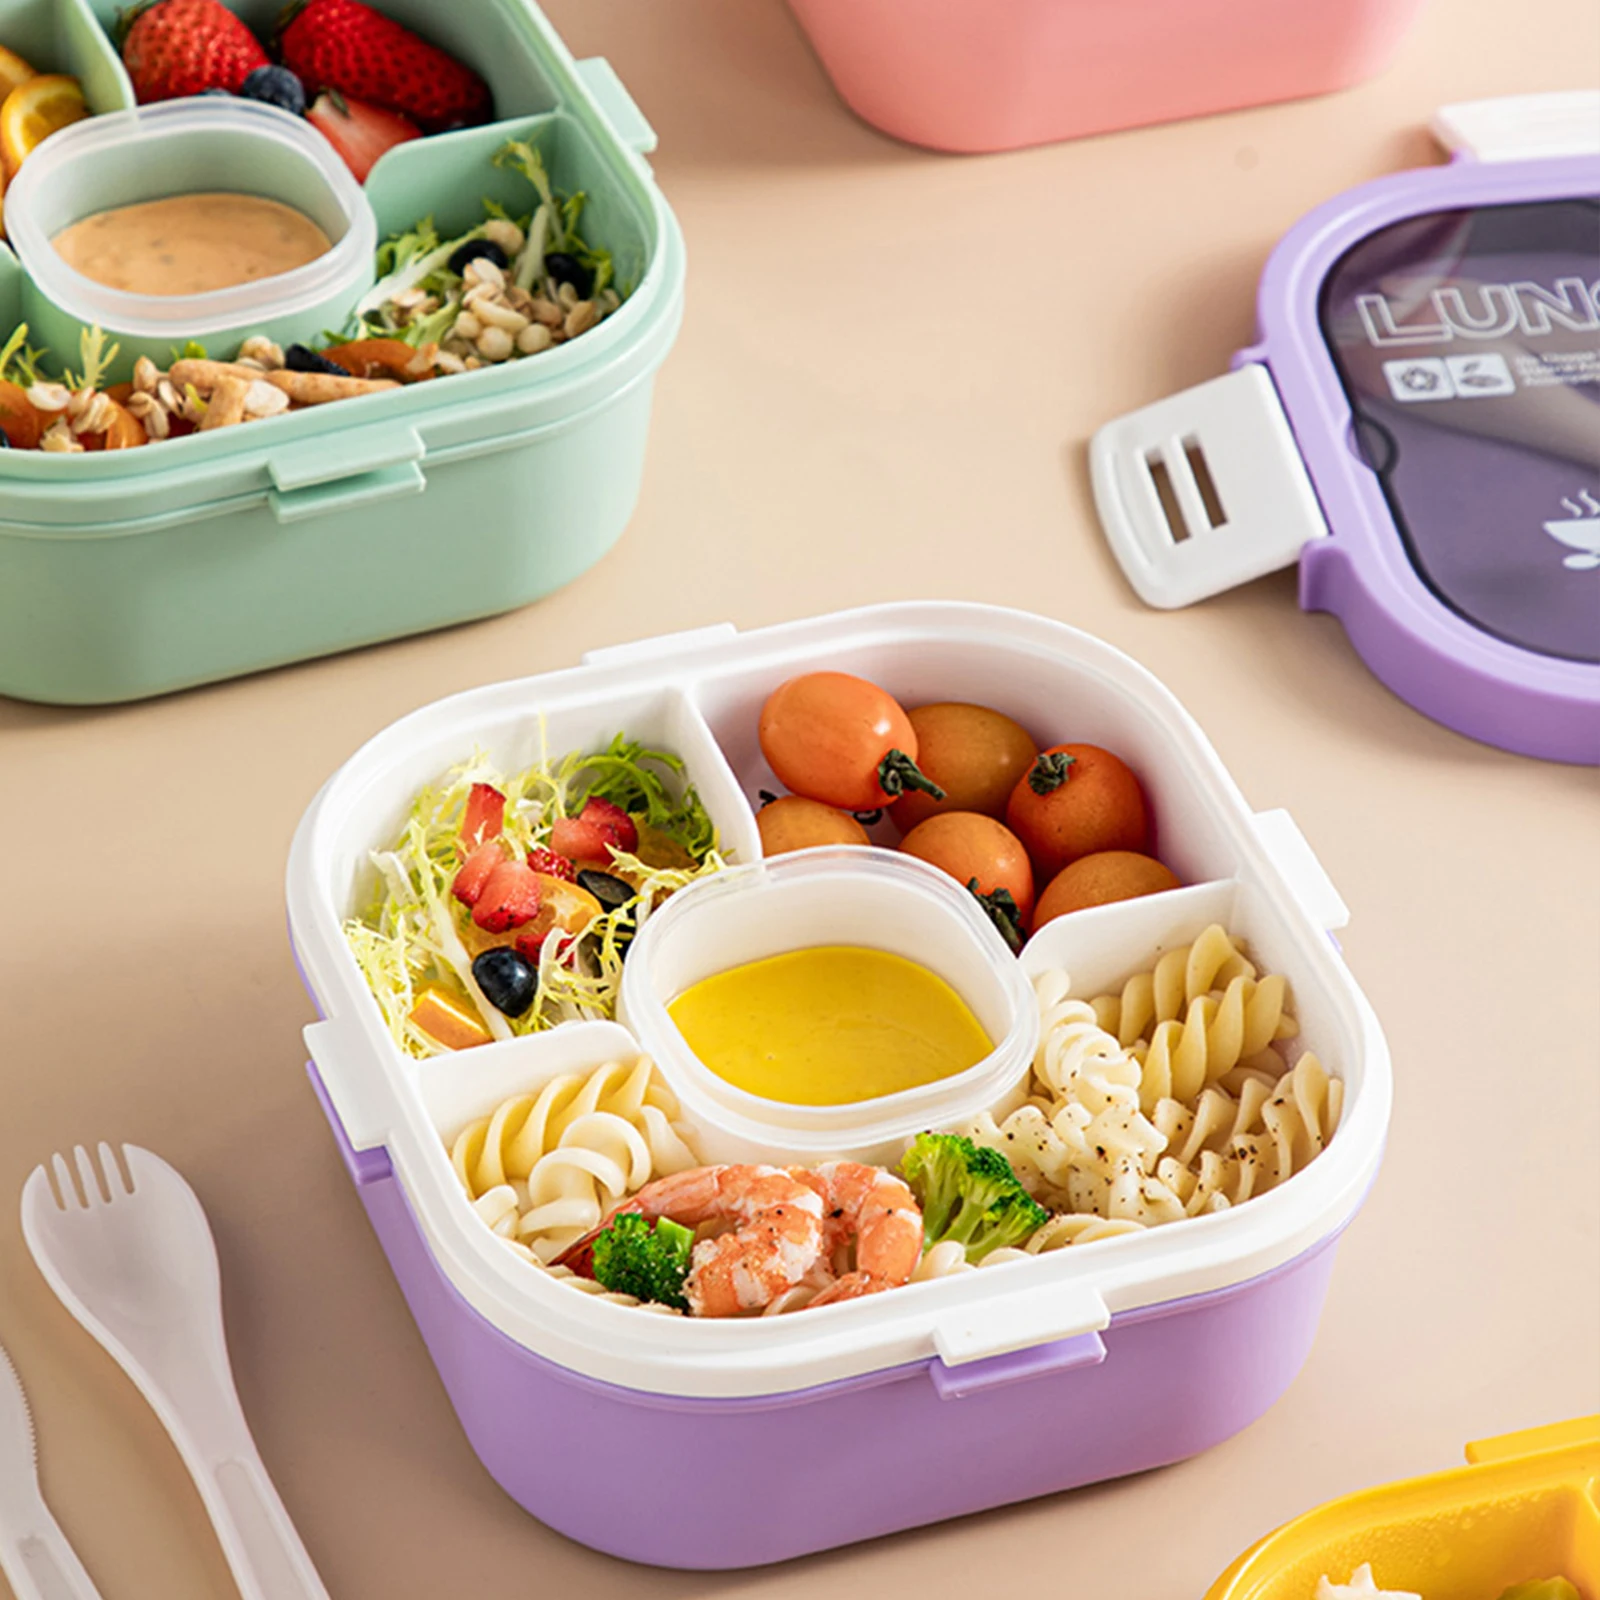 https://ae01.alicdn.com/kf/S82ad571173764f48983a9586dcd3acbf2/2023-New-1-Set-Durable-Lunch-Box-Portable-Salad-Container-with-Spoon-Fork-Storage-Good-Sealing.jpg